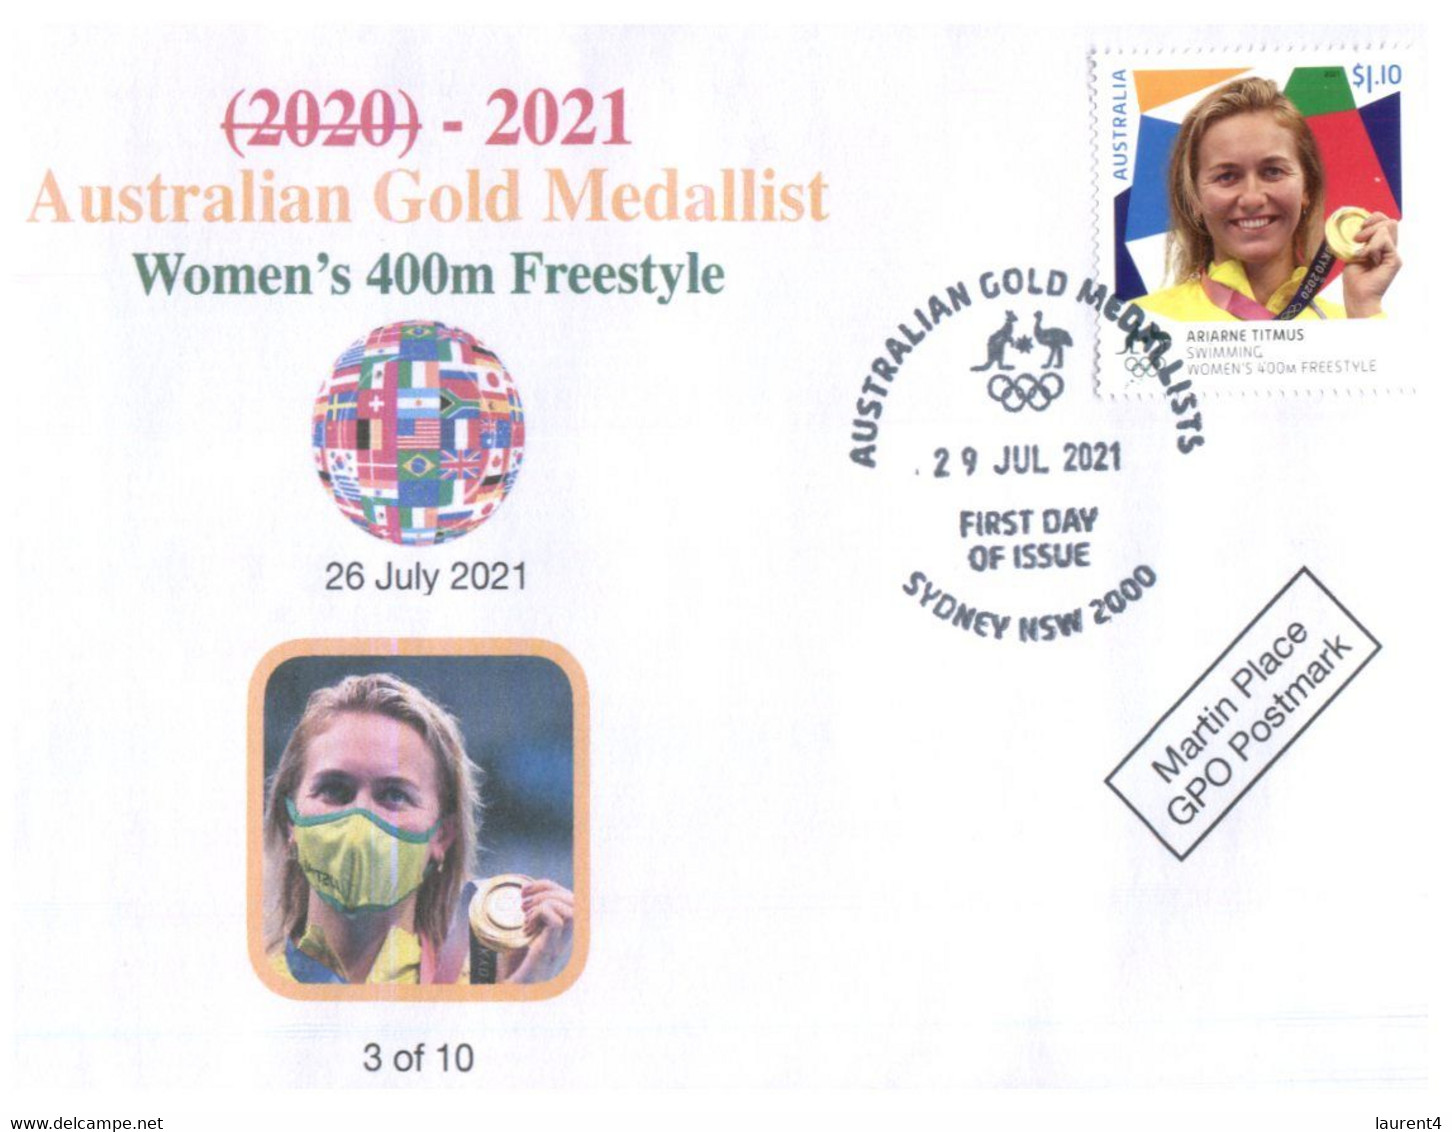 (WW 8) 2020 Tokyo Olympic Games - Swimming - Woman's 400 M Freestyle Gold (NEW Australia Post Stamp) - Sommer 2020: Tokio